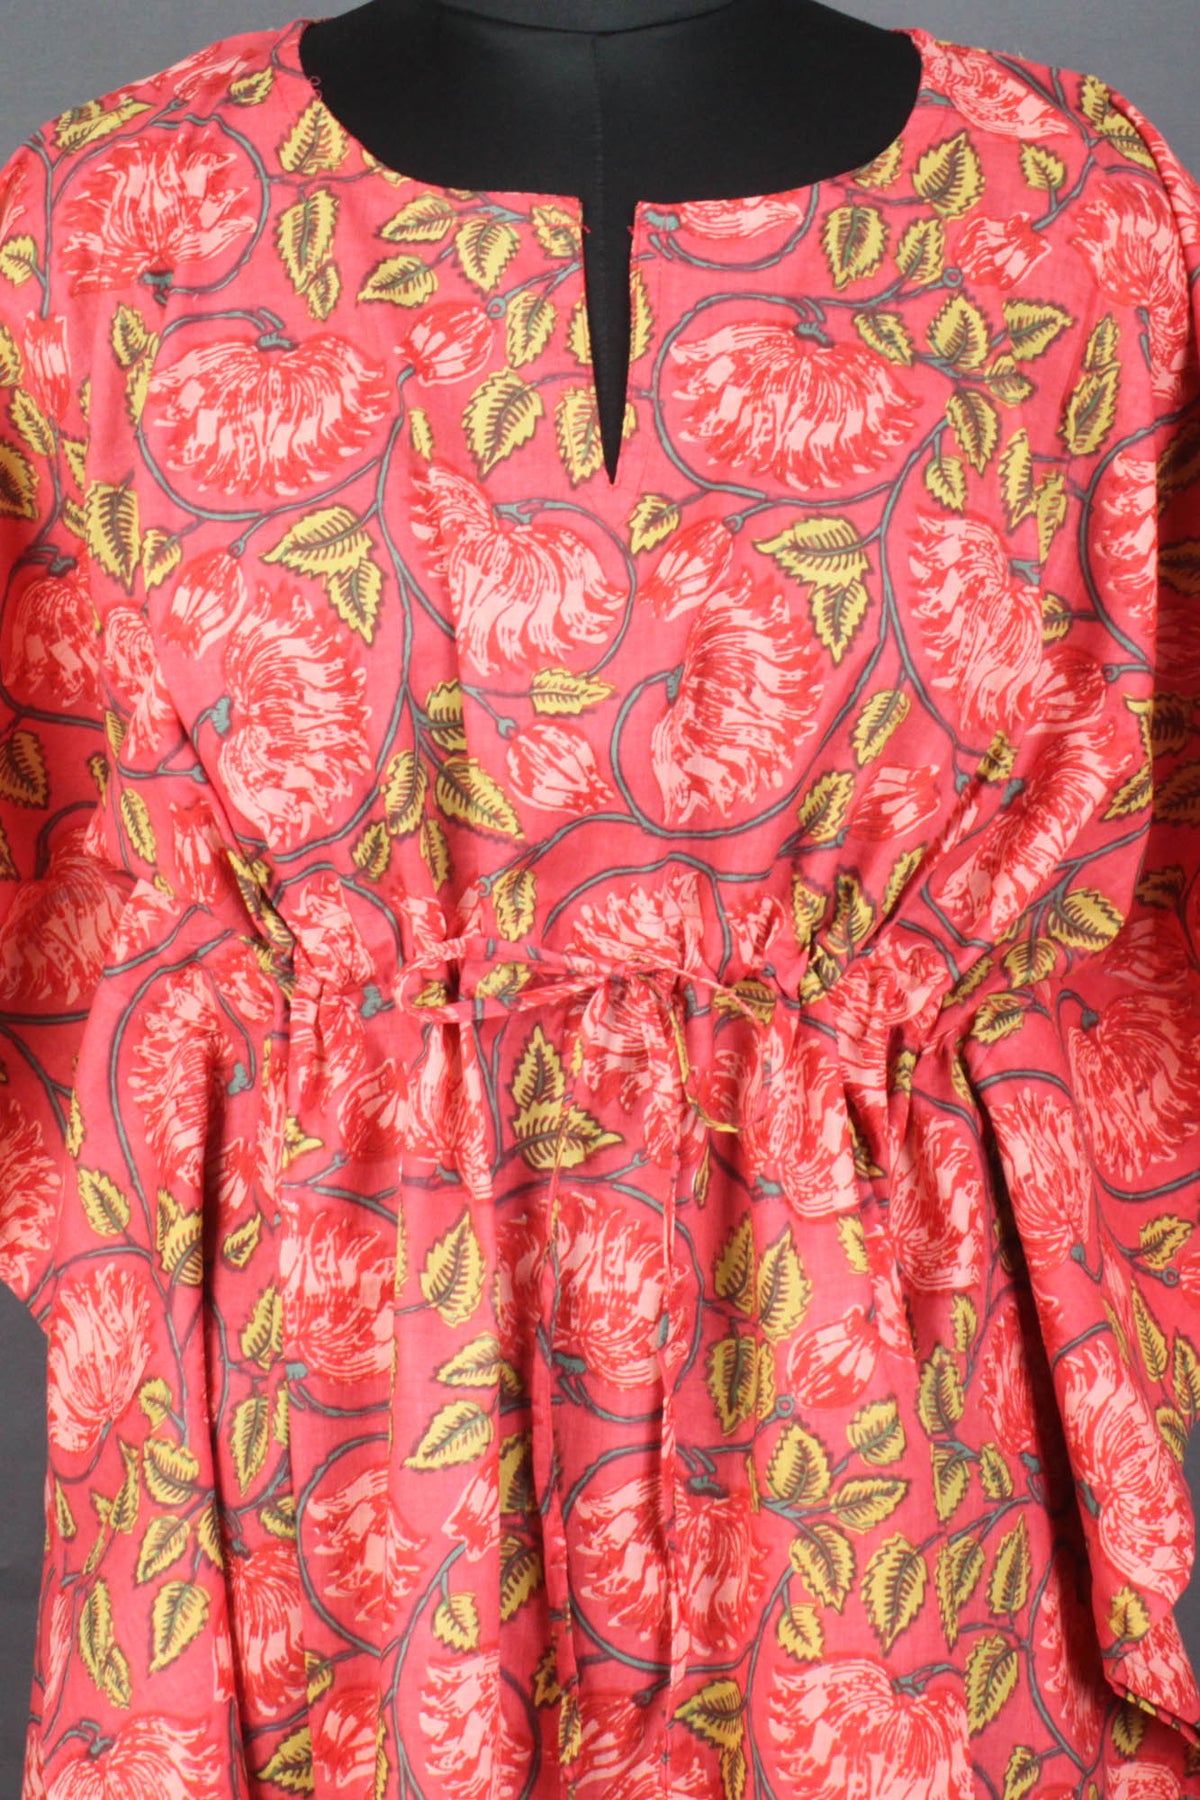 Block Printed Cotton Coverup / Kaftans - Red Lotus